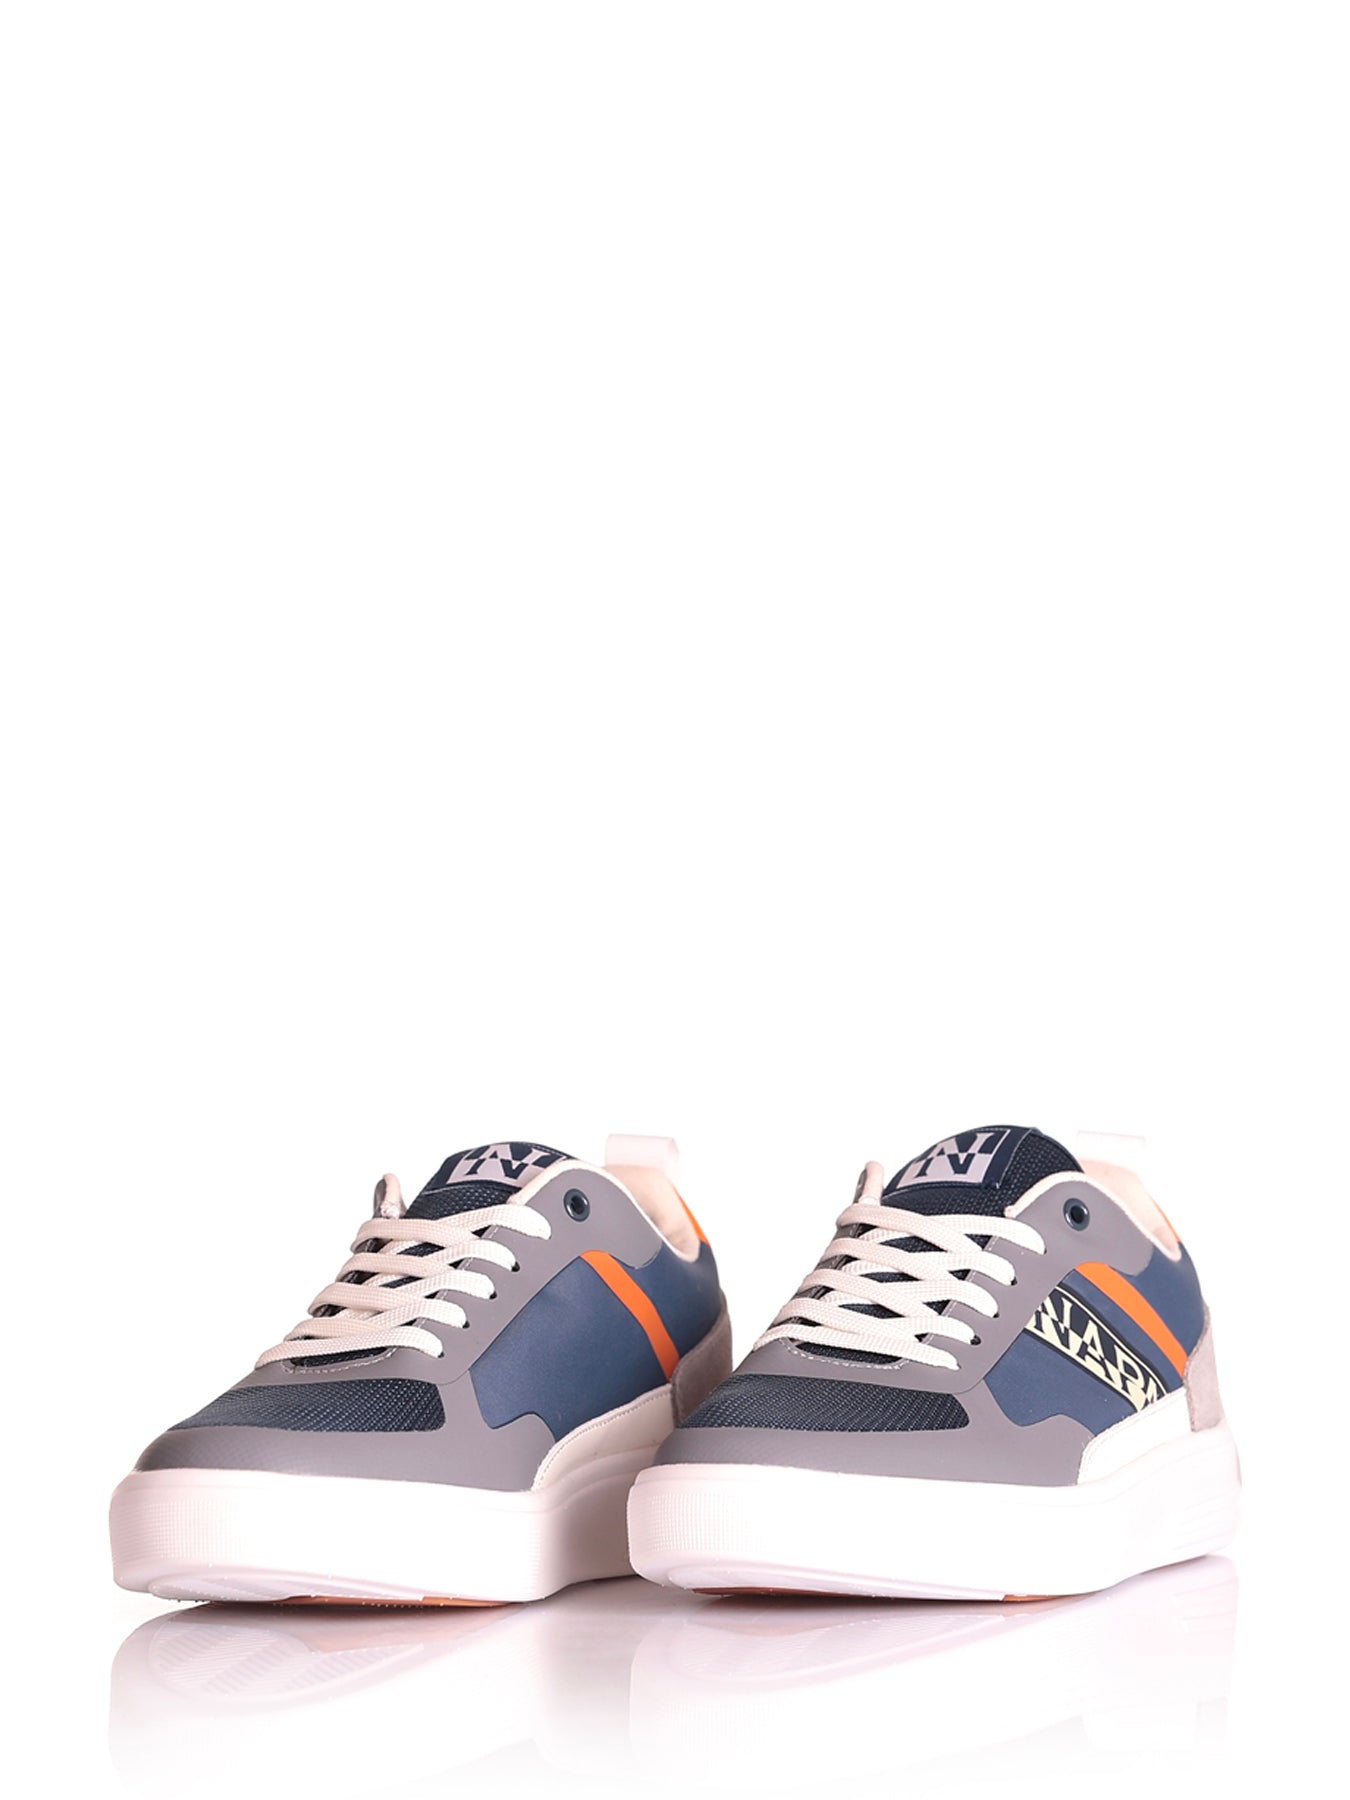 Paper Sneakers Np0a4hkr Navy/grey